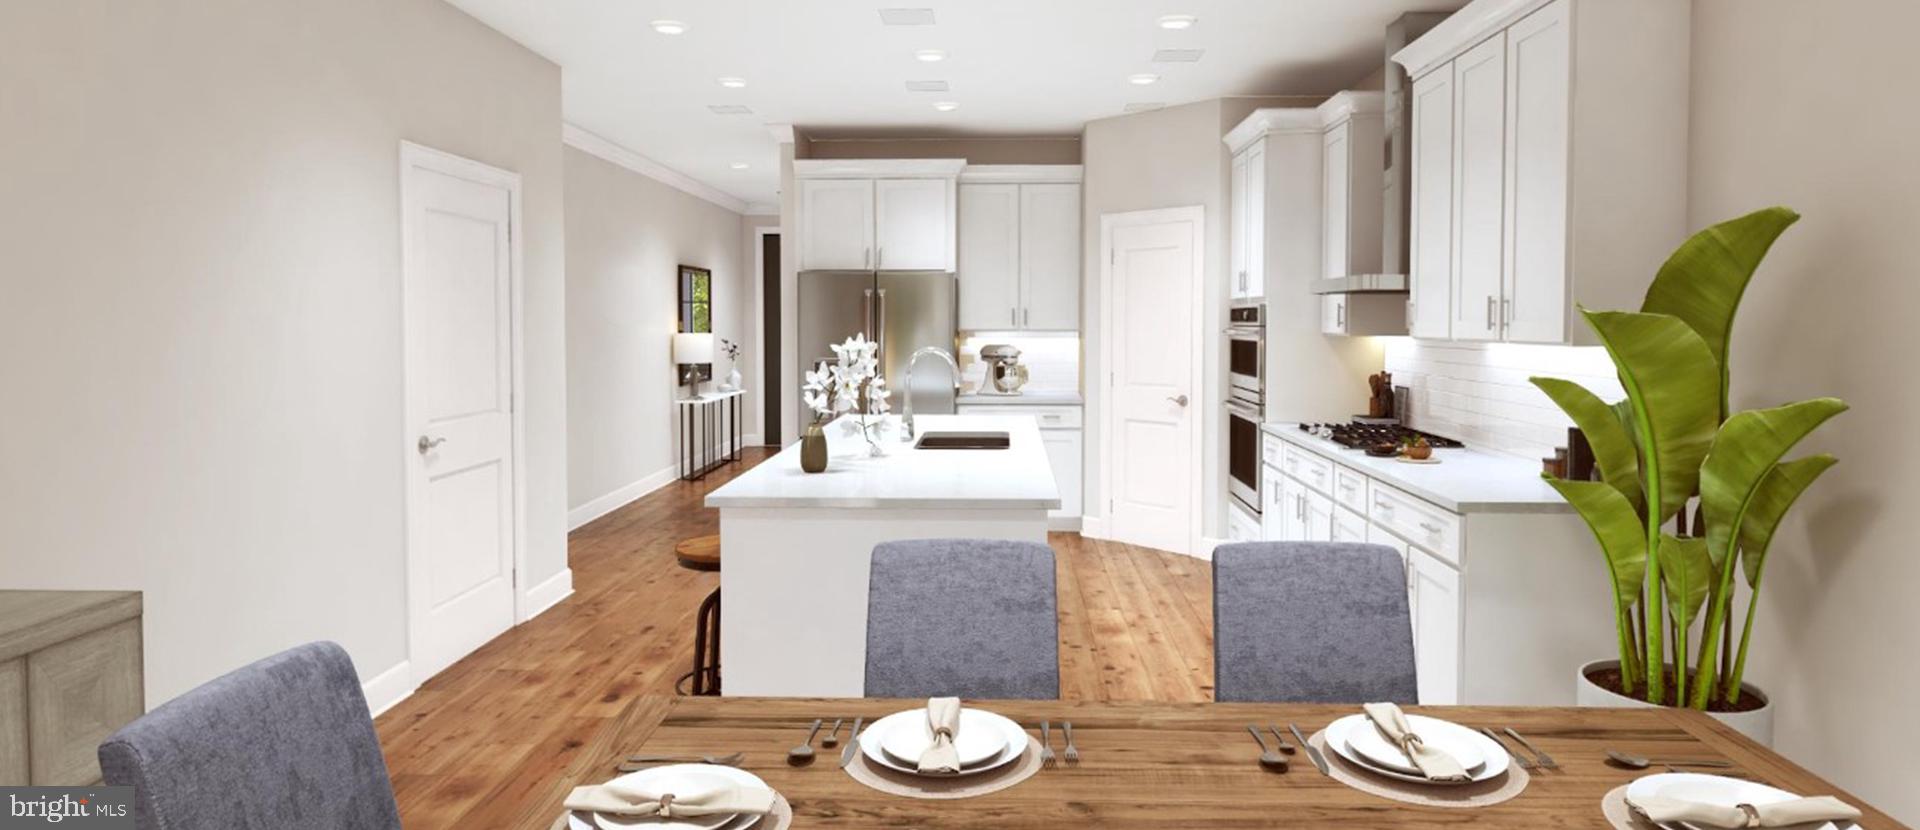 The Landry is one of Stanley Martin's newest main-level living home designs featuring a smart open-c